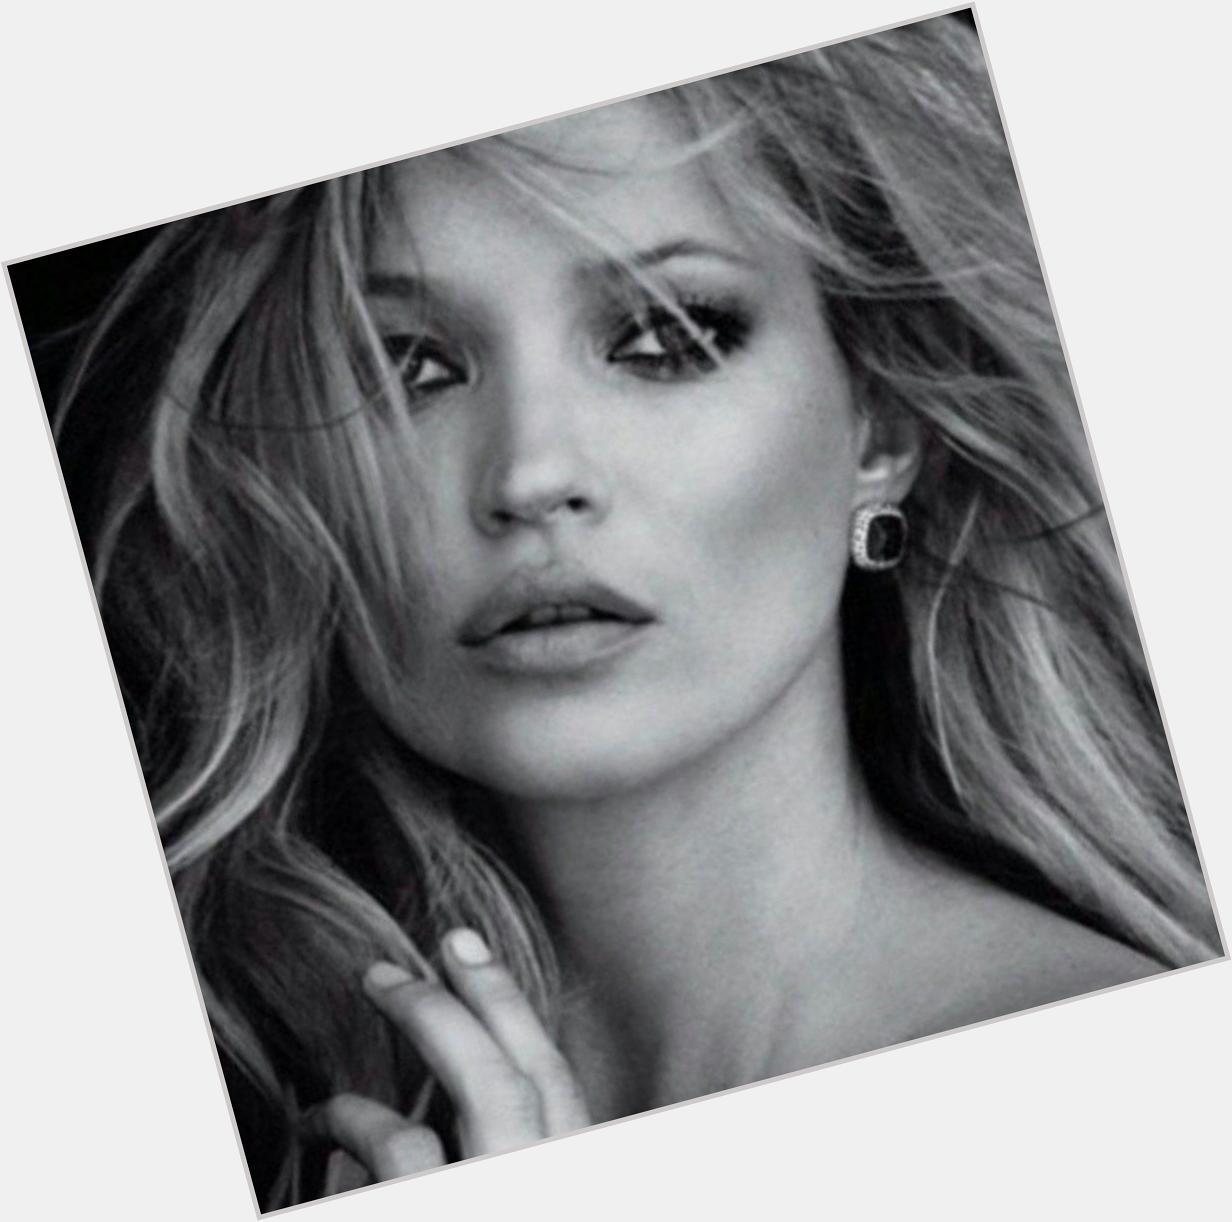 Happy birthday to one of our favourite beauty icon Kate Moss!! 